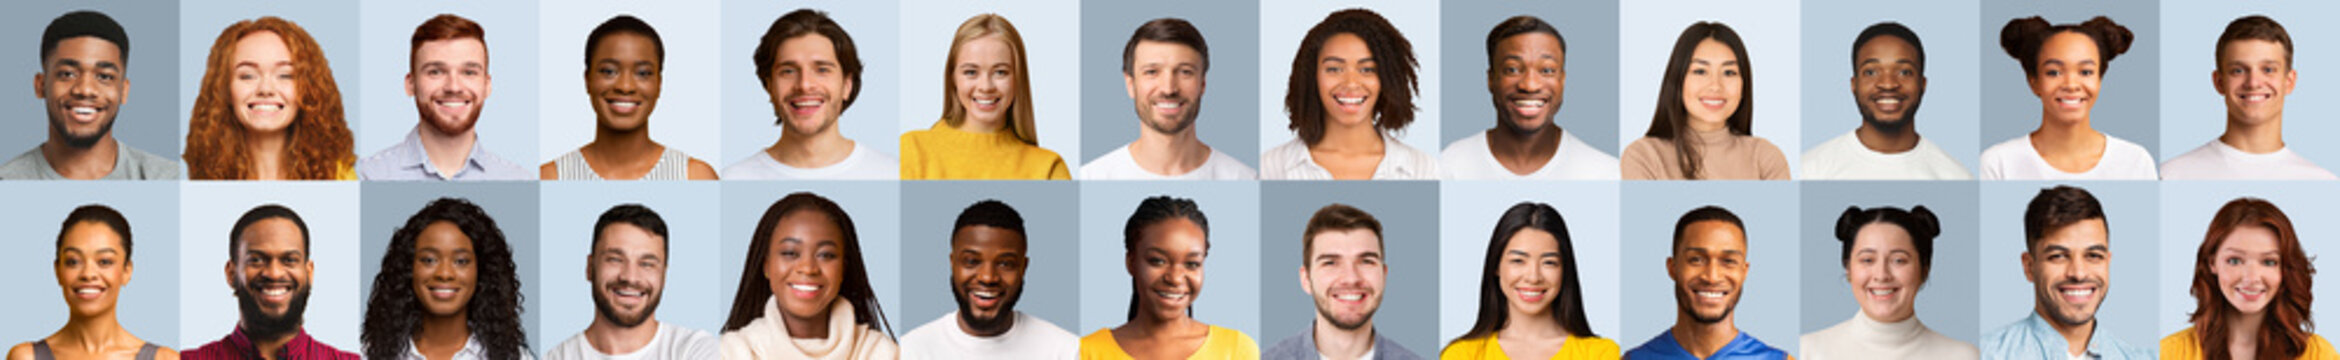 Range Of Diverse People Faces In Collage Over Blue Backgrounds